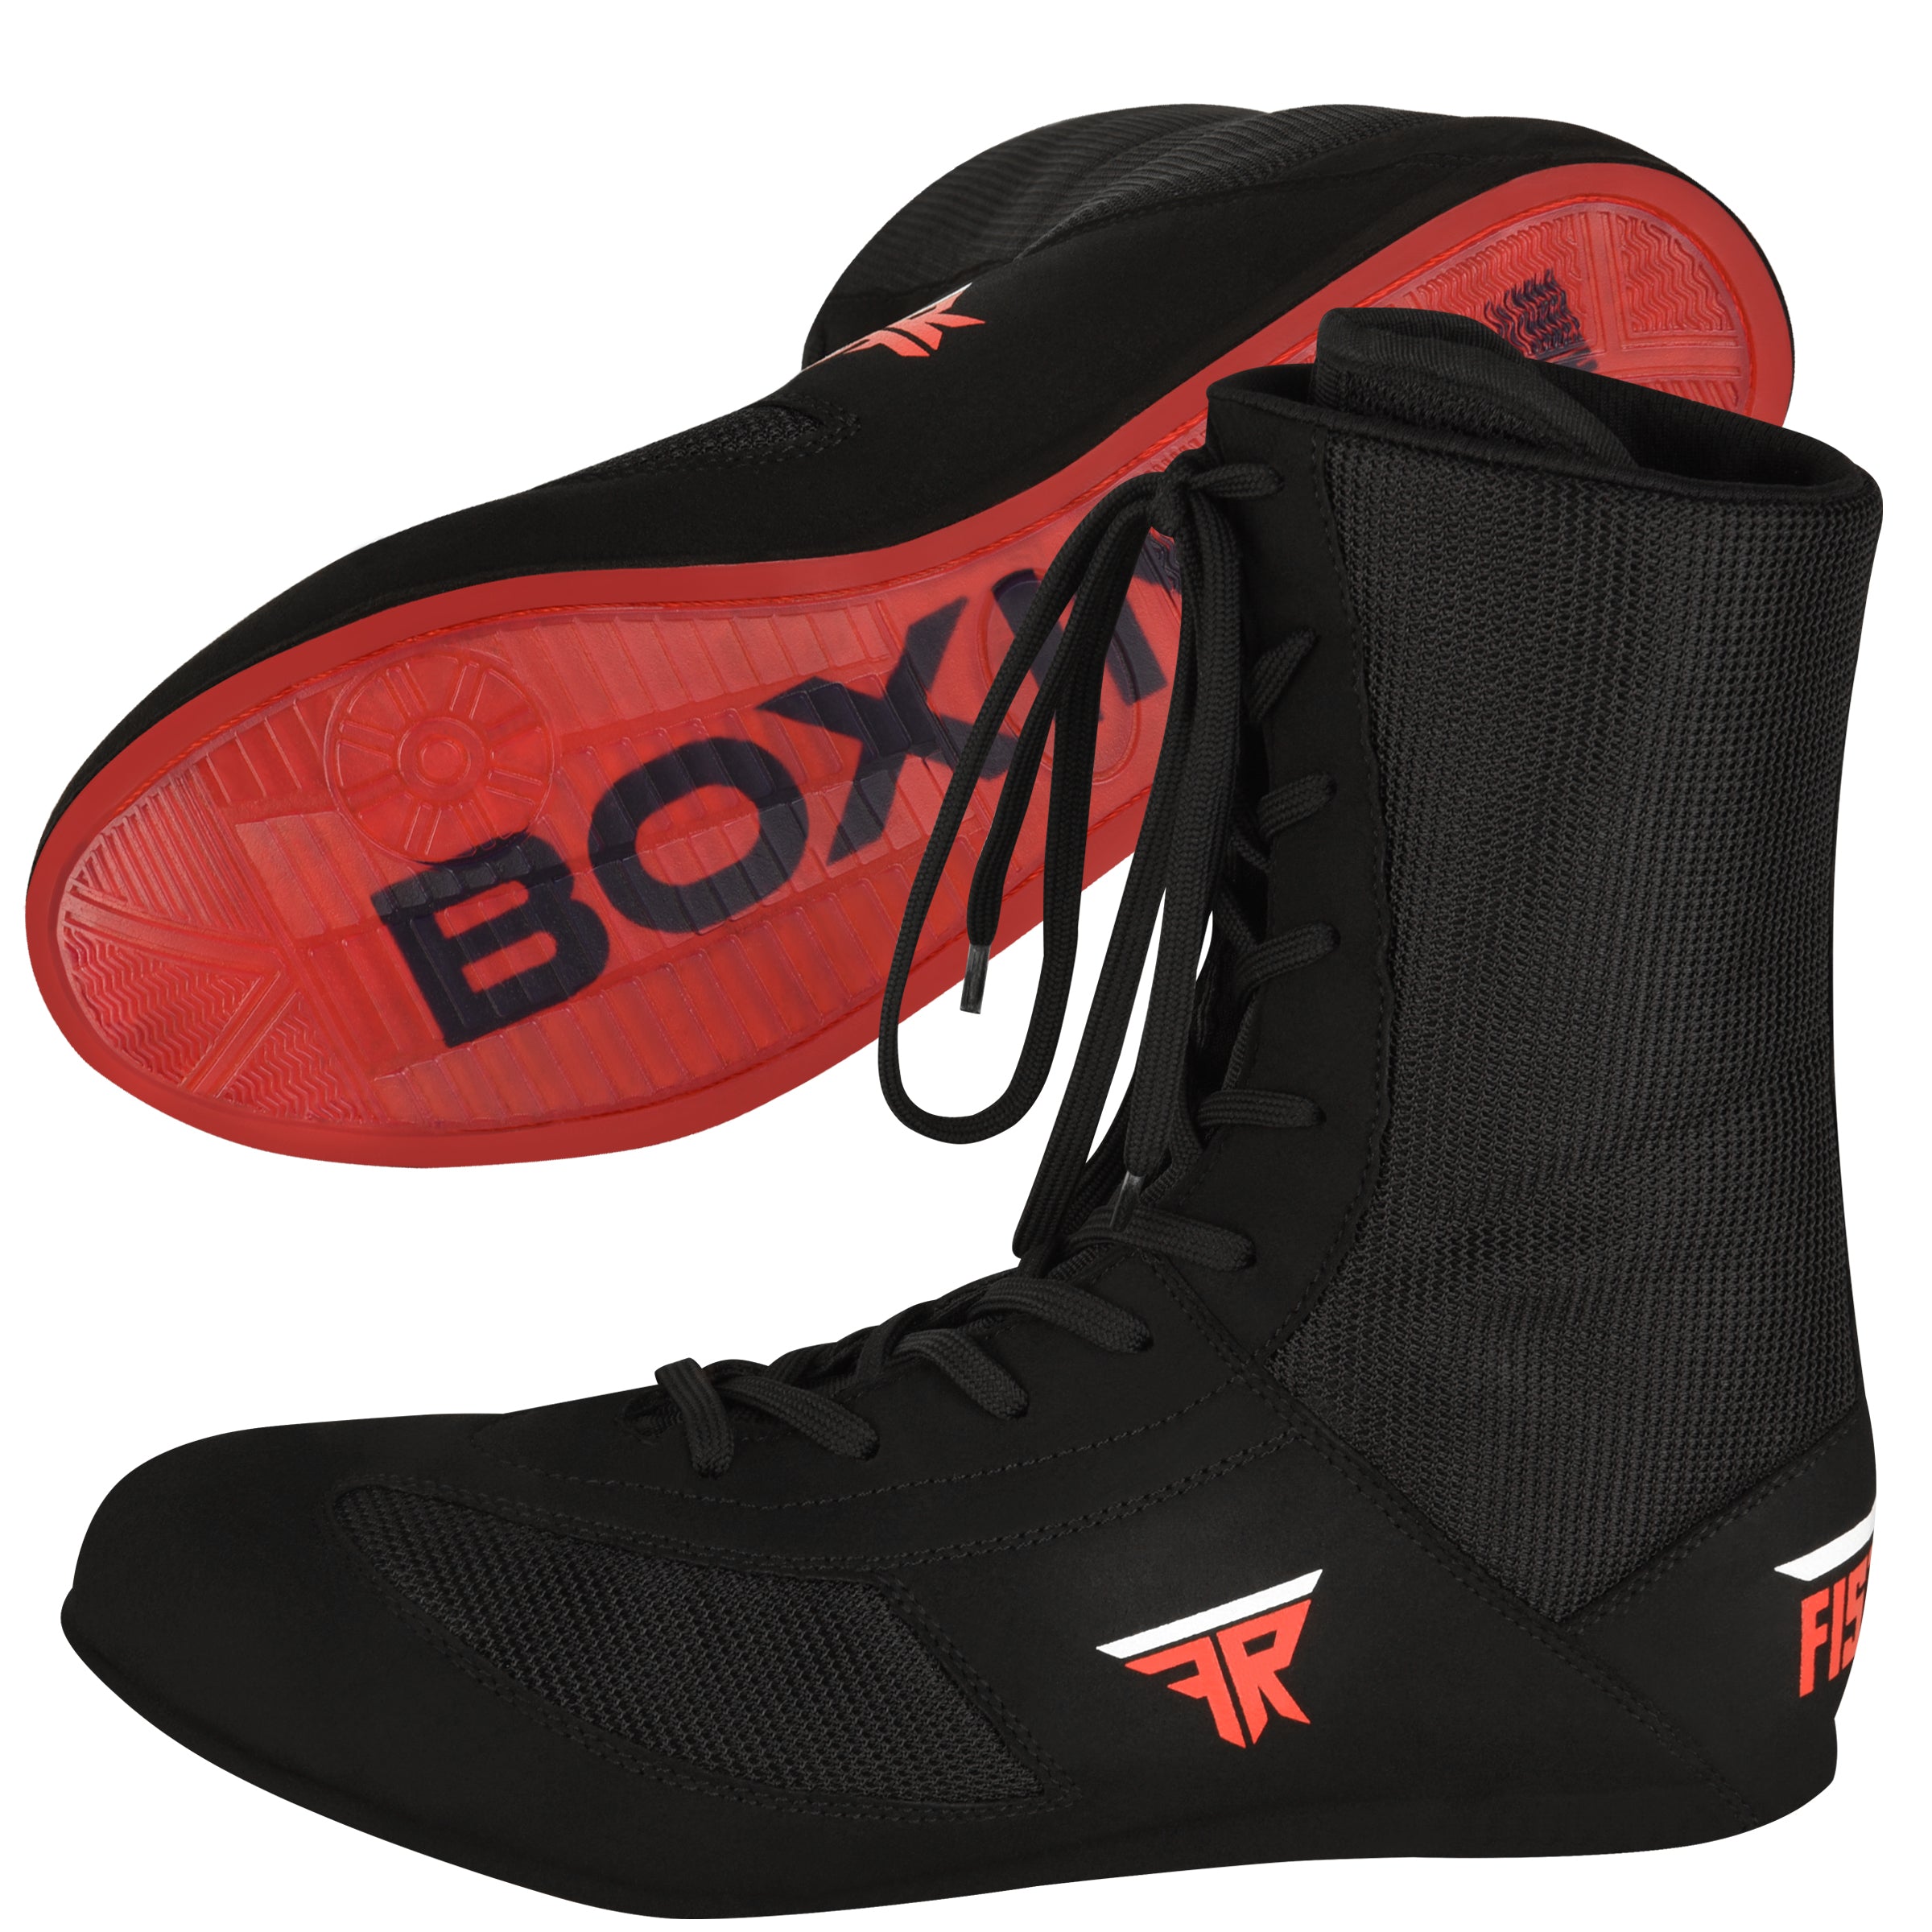 FISTRAGE HIGH TOP BOXING SHOES - image 5 of 7